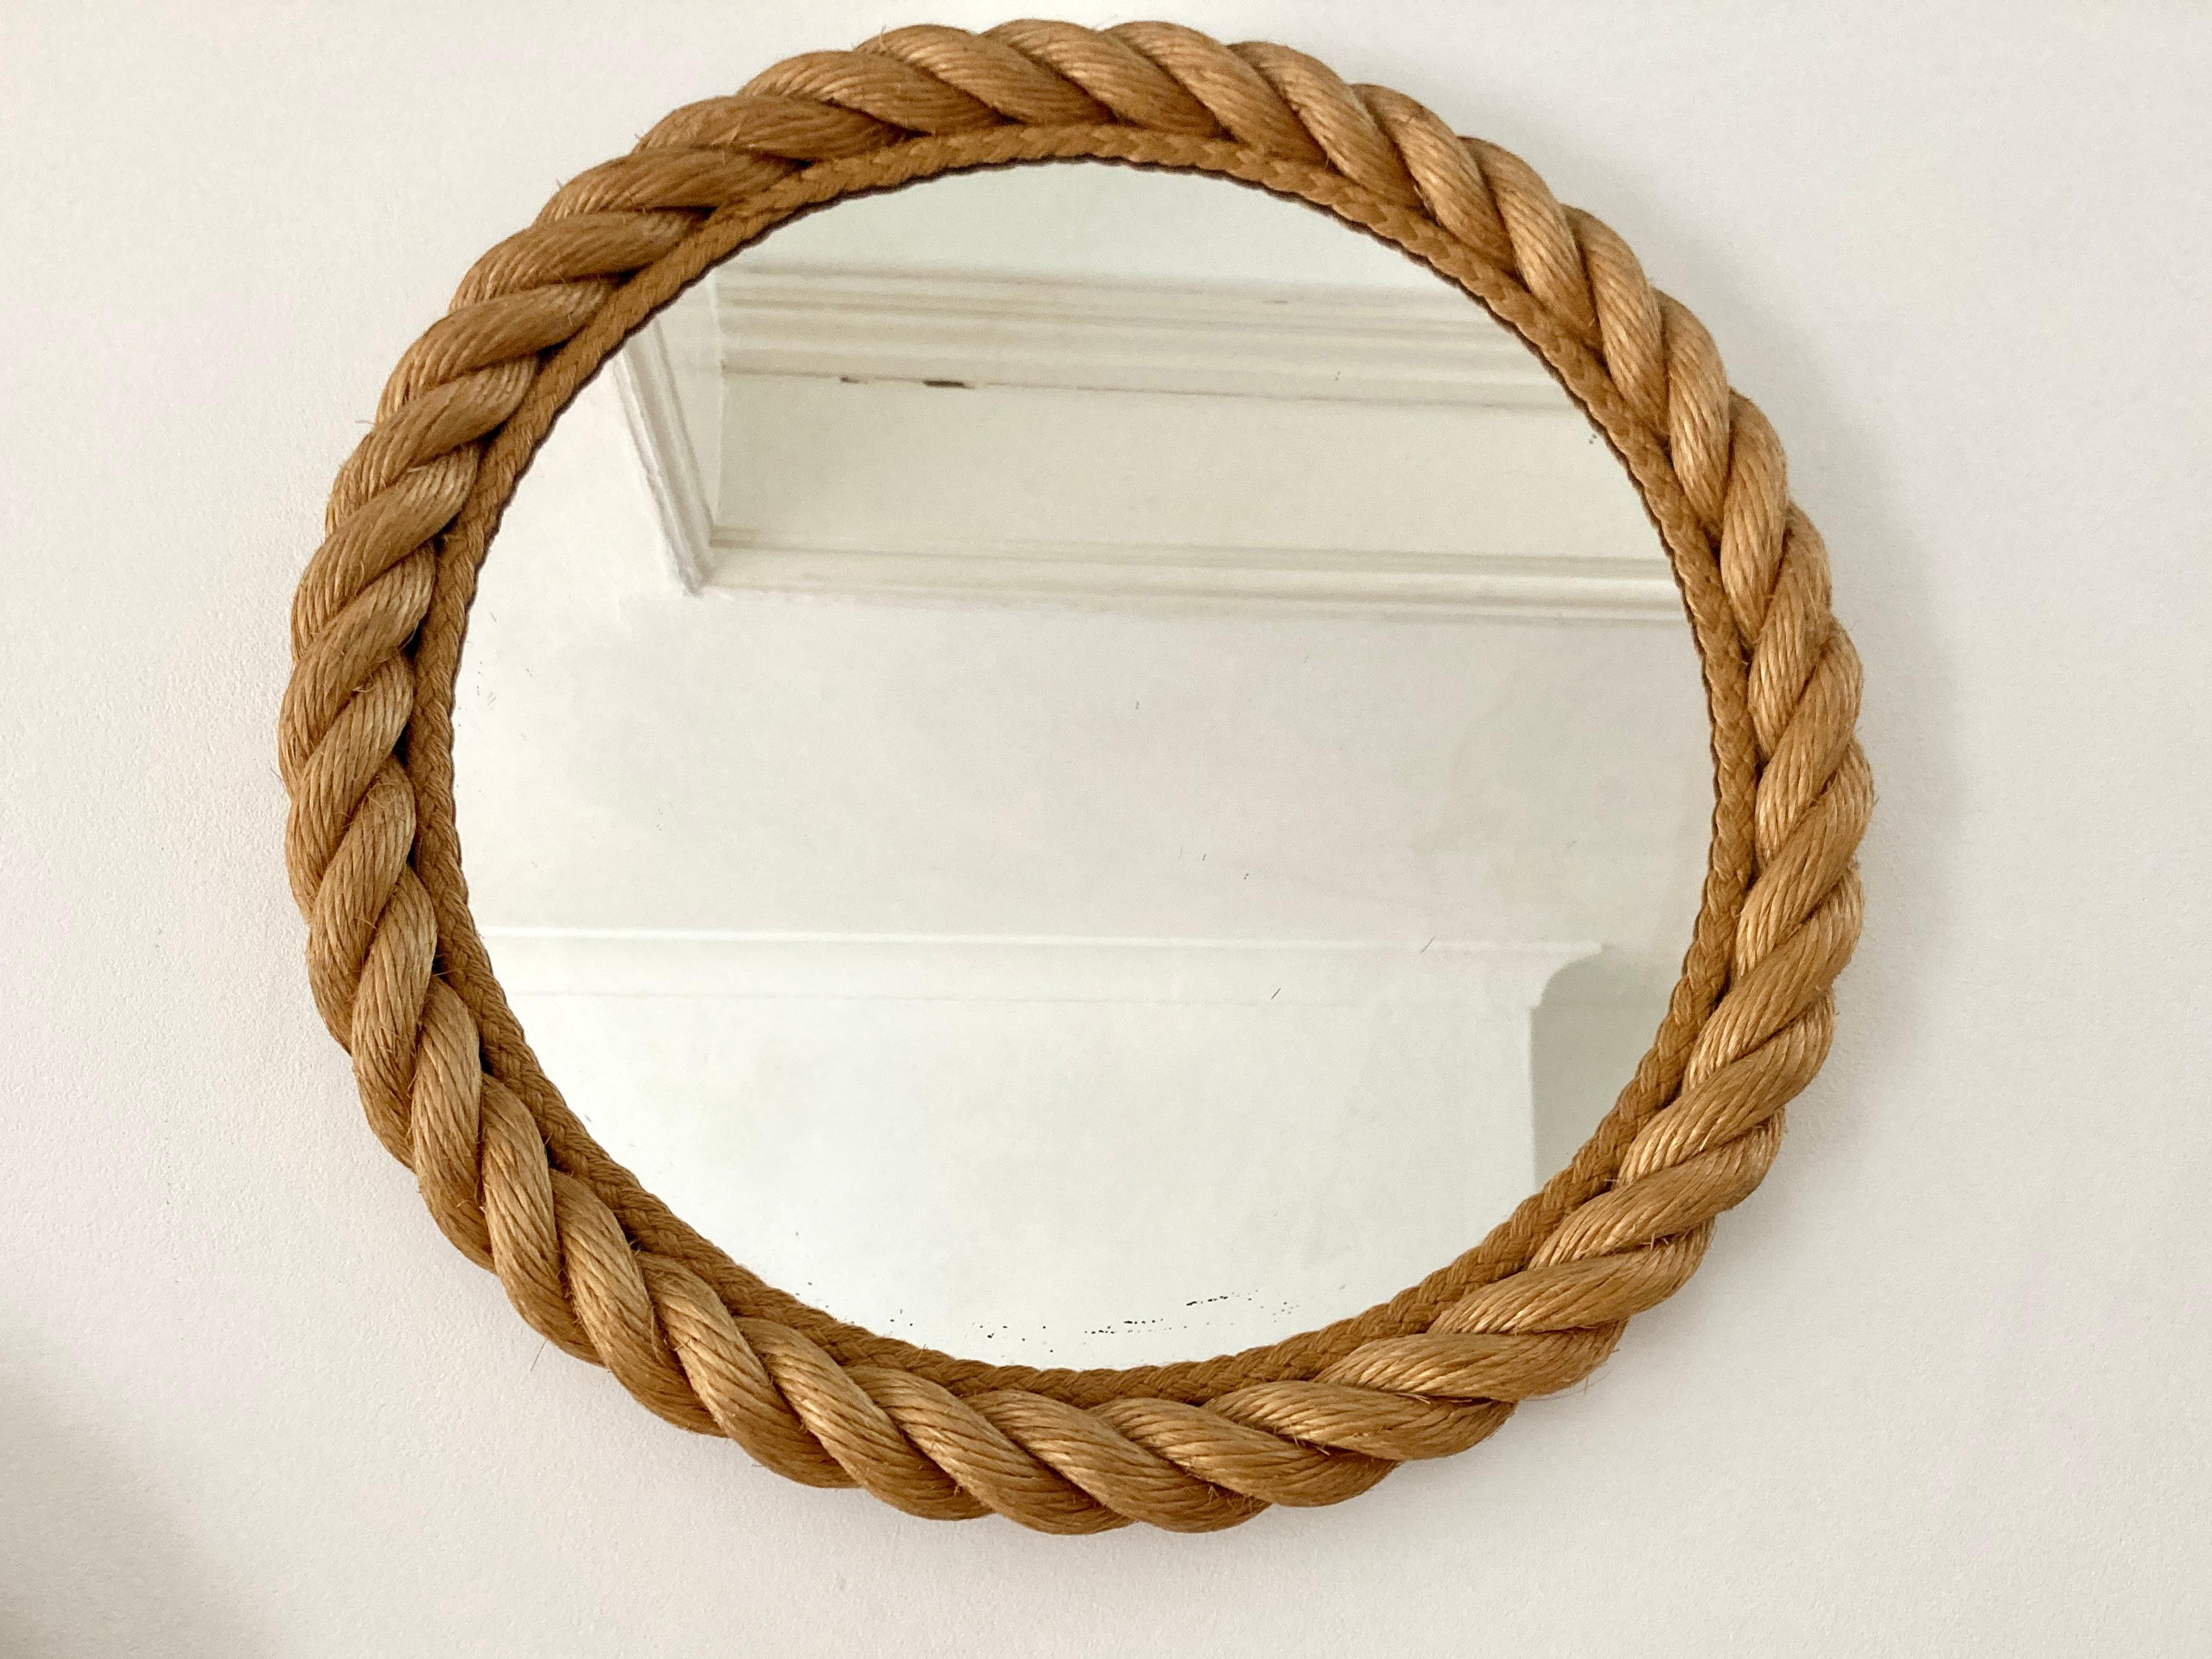 A good size (45 cm diameter) rope frame mirror by Adrien Audoux and Frida Minet, France, circa 1950-1960.

Very good original condition, nice colour to the rope, very clean with no damage.

Slight age related foxing to the bottom of the glass,